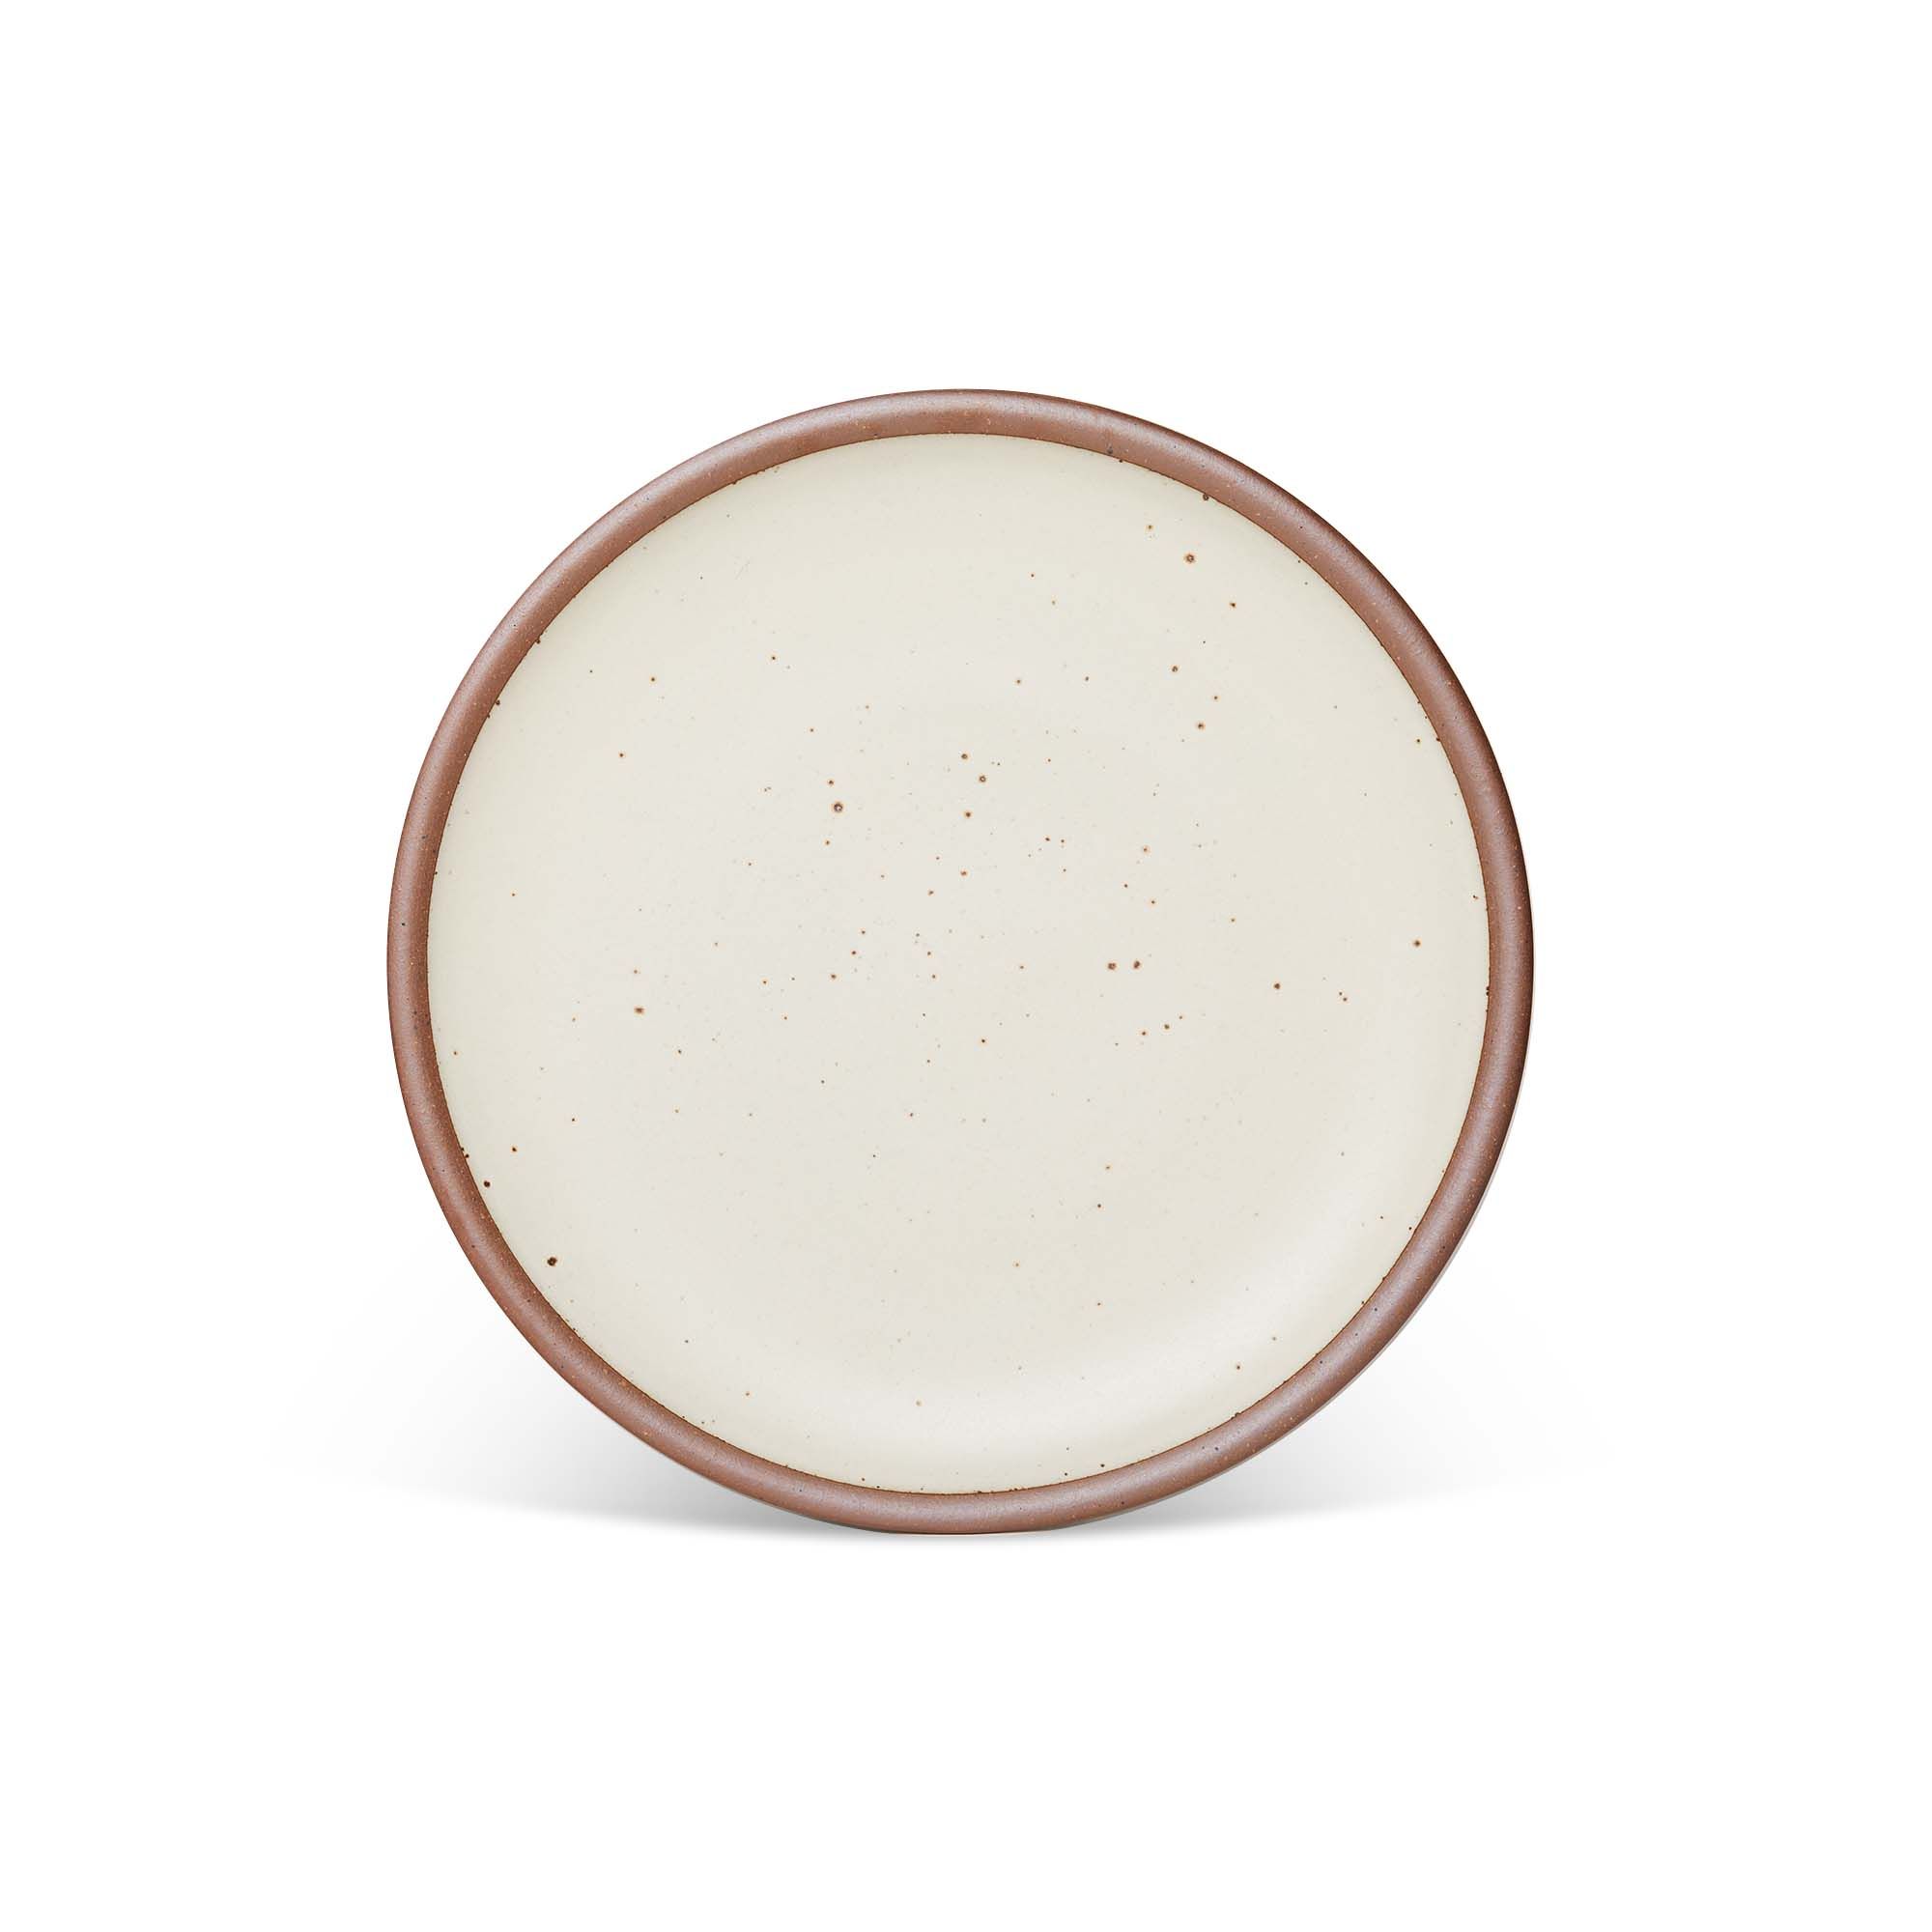 A dinner sized ceramic plate in a warm, tan-toned, off-white color featuring iron speckles and an unglazed rim.